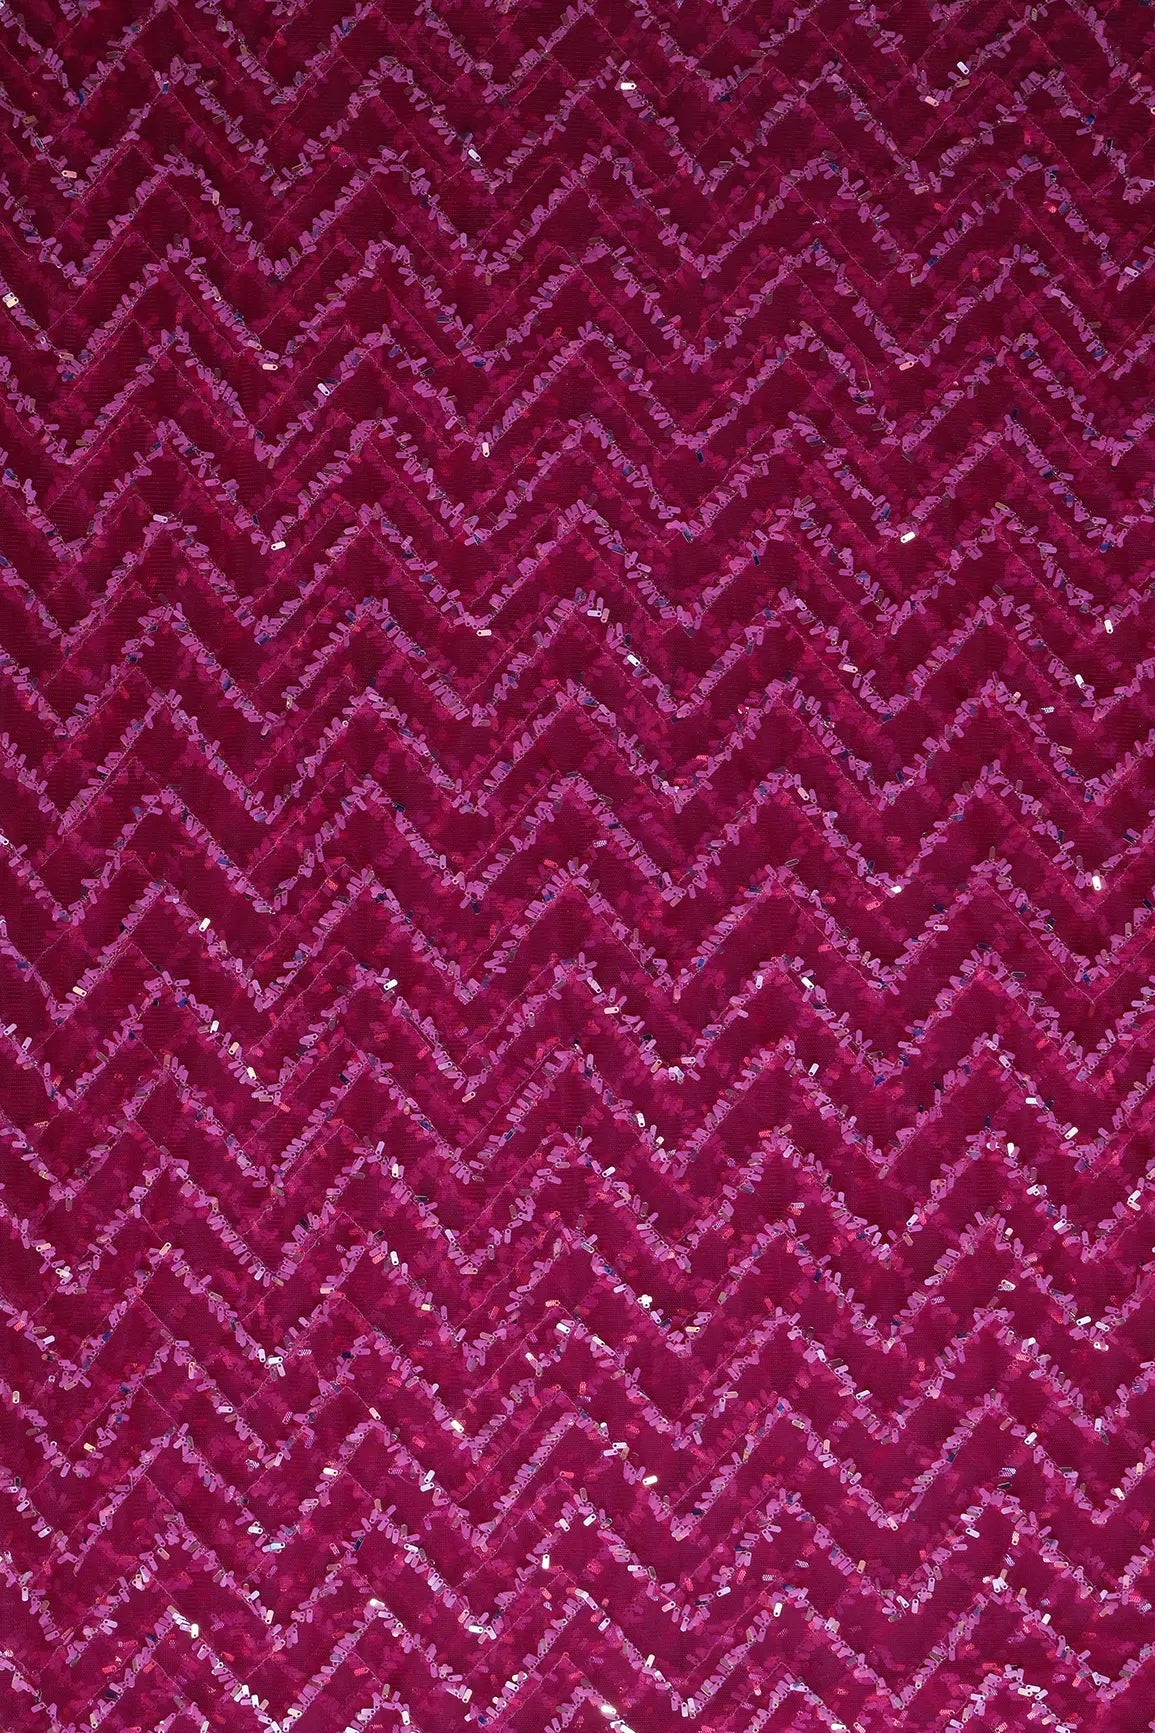 2 Meter Cut Piece Of Oval Sequins Chevron Embroidery Work On Fuchsia Soft Net Fabric - doeraa